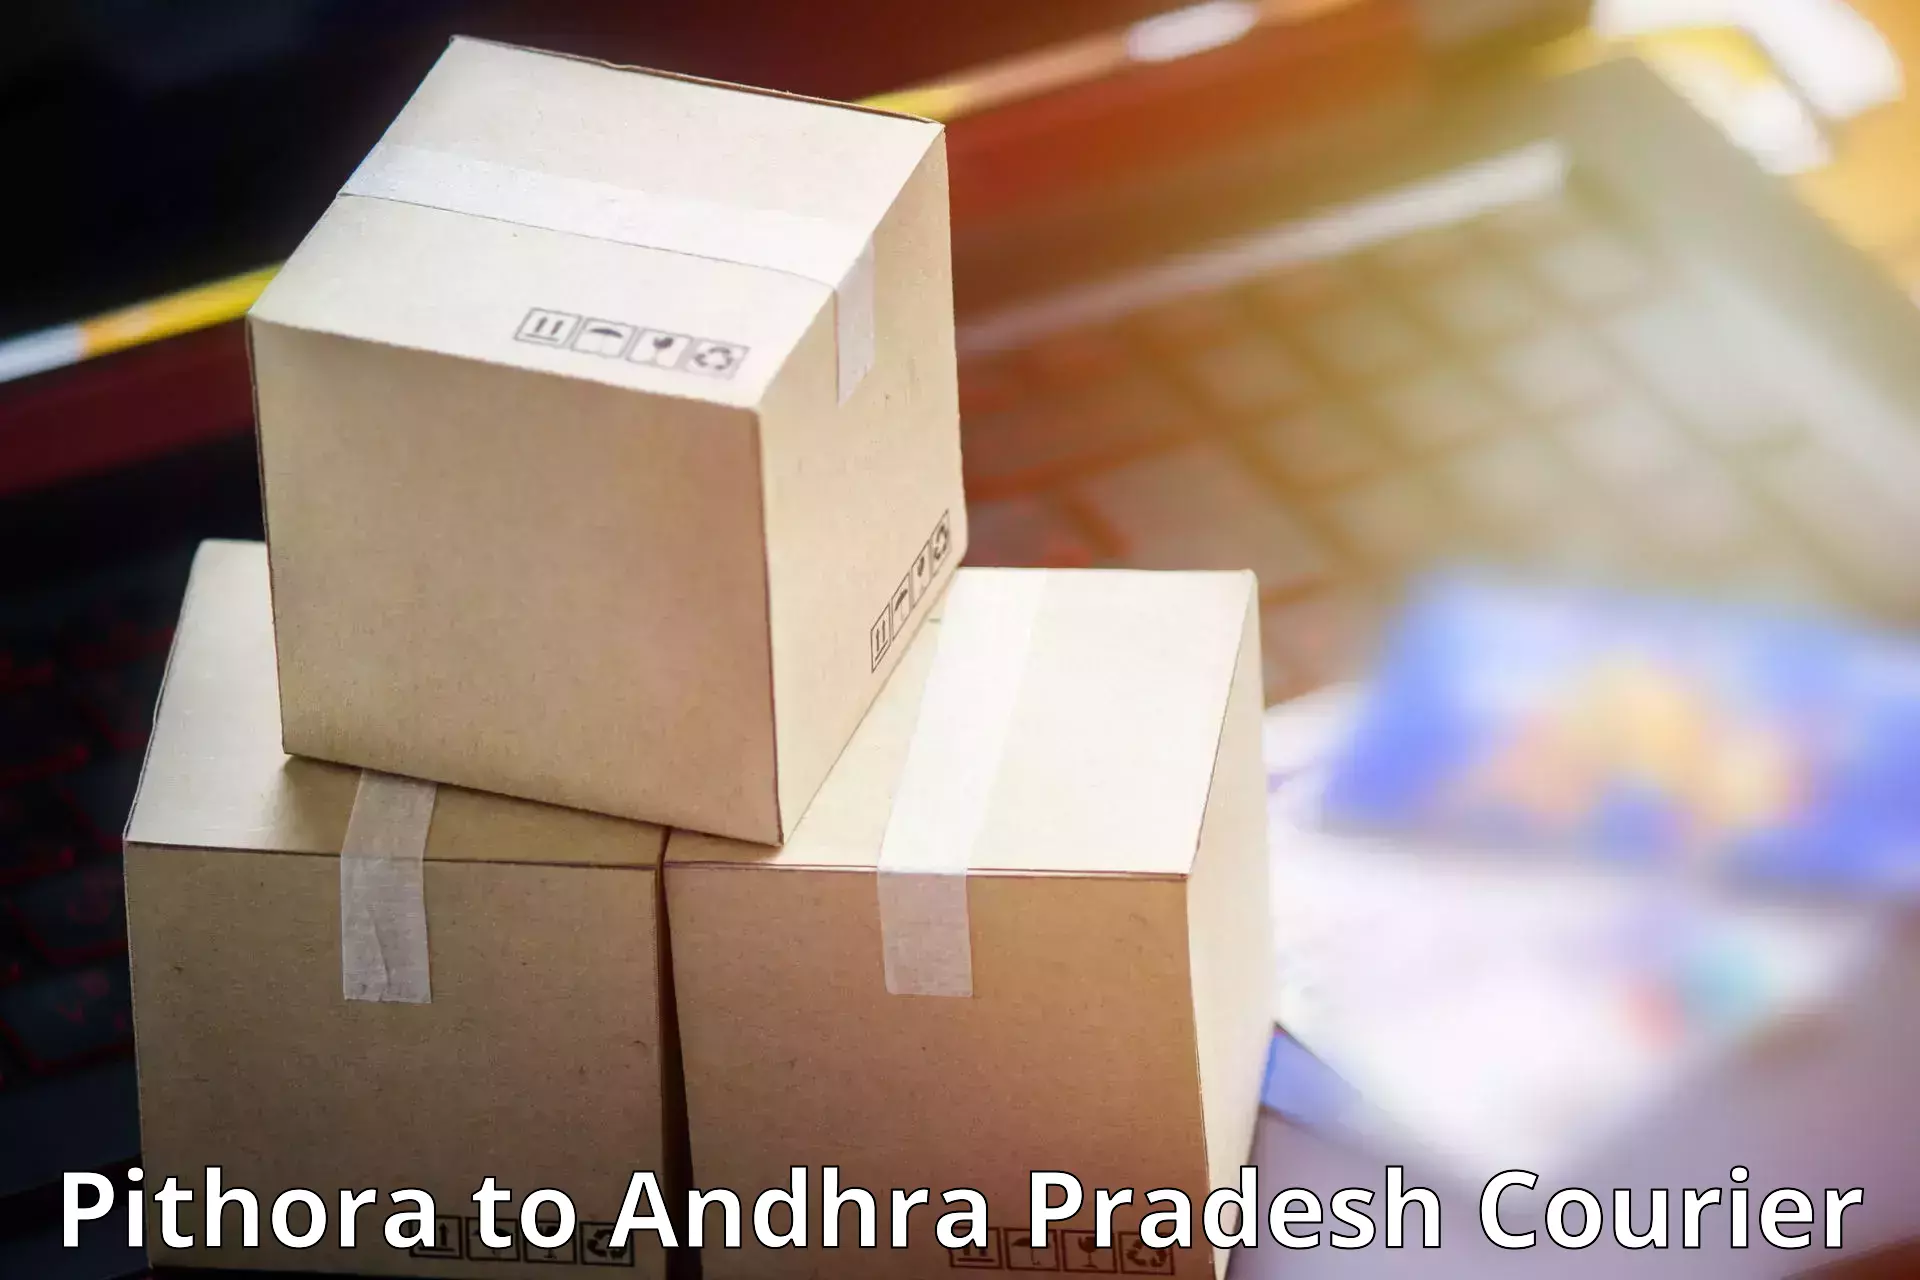 User-friendly delivery service in Pithora to Gampalagudem